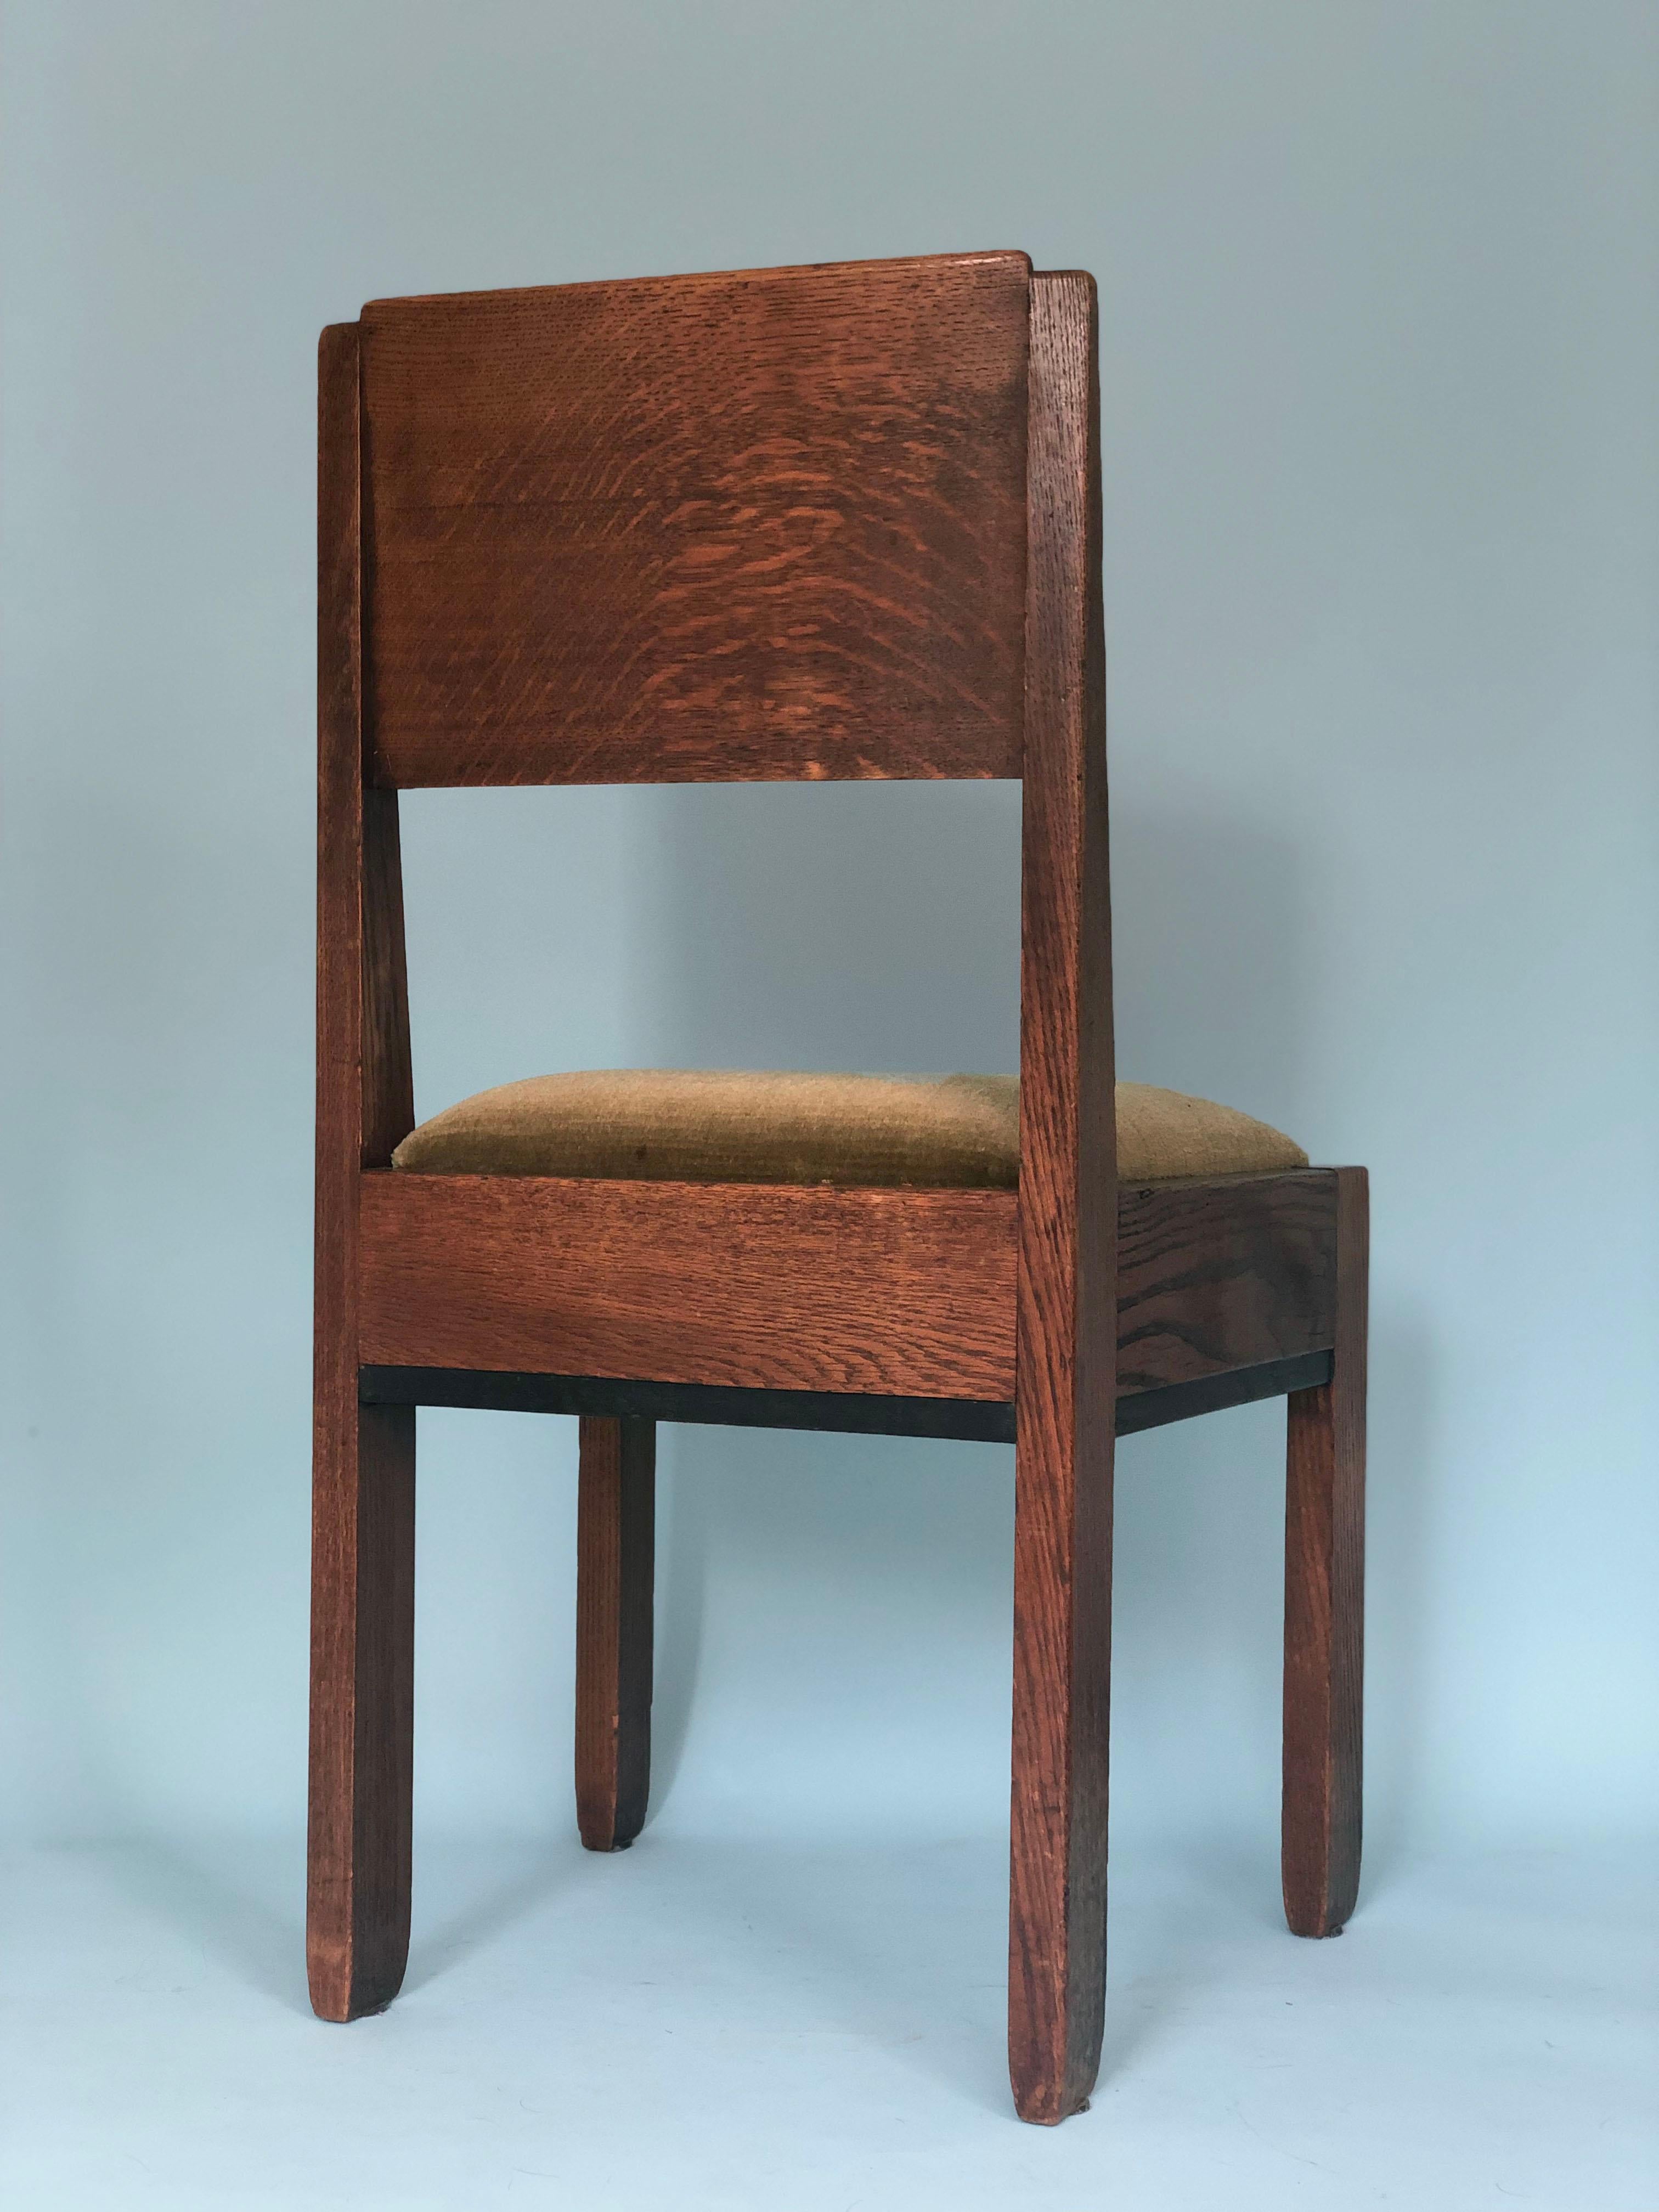 Dutch ON HOLD Art Deco Oak Dining Chairs by J.A. Muntendam for L.O.V. Oosterbeek 1920s